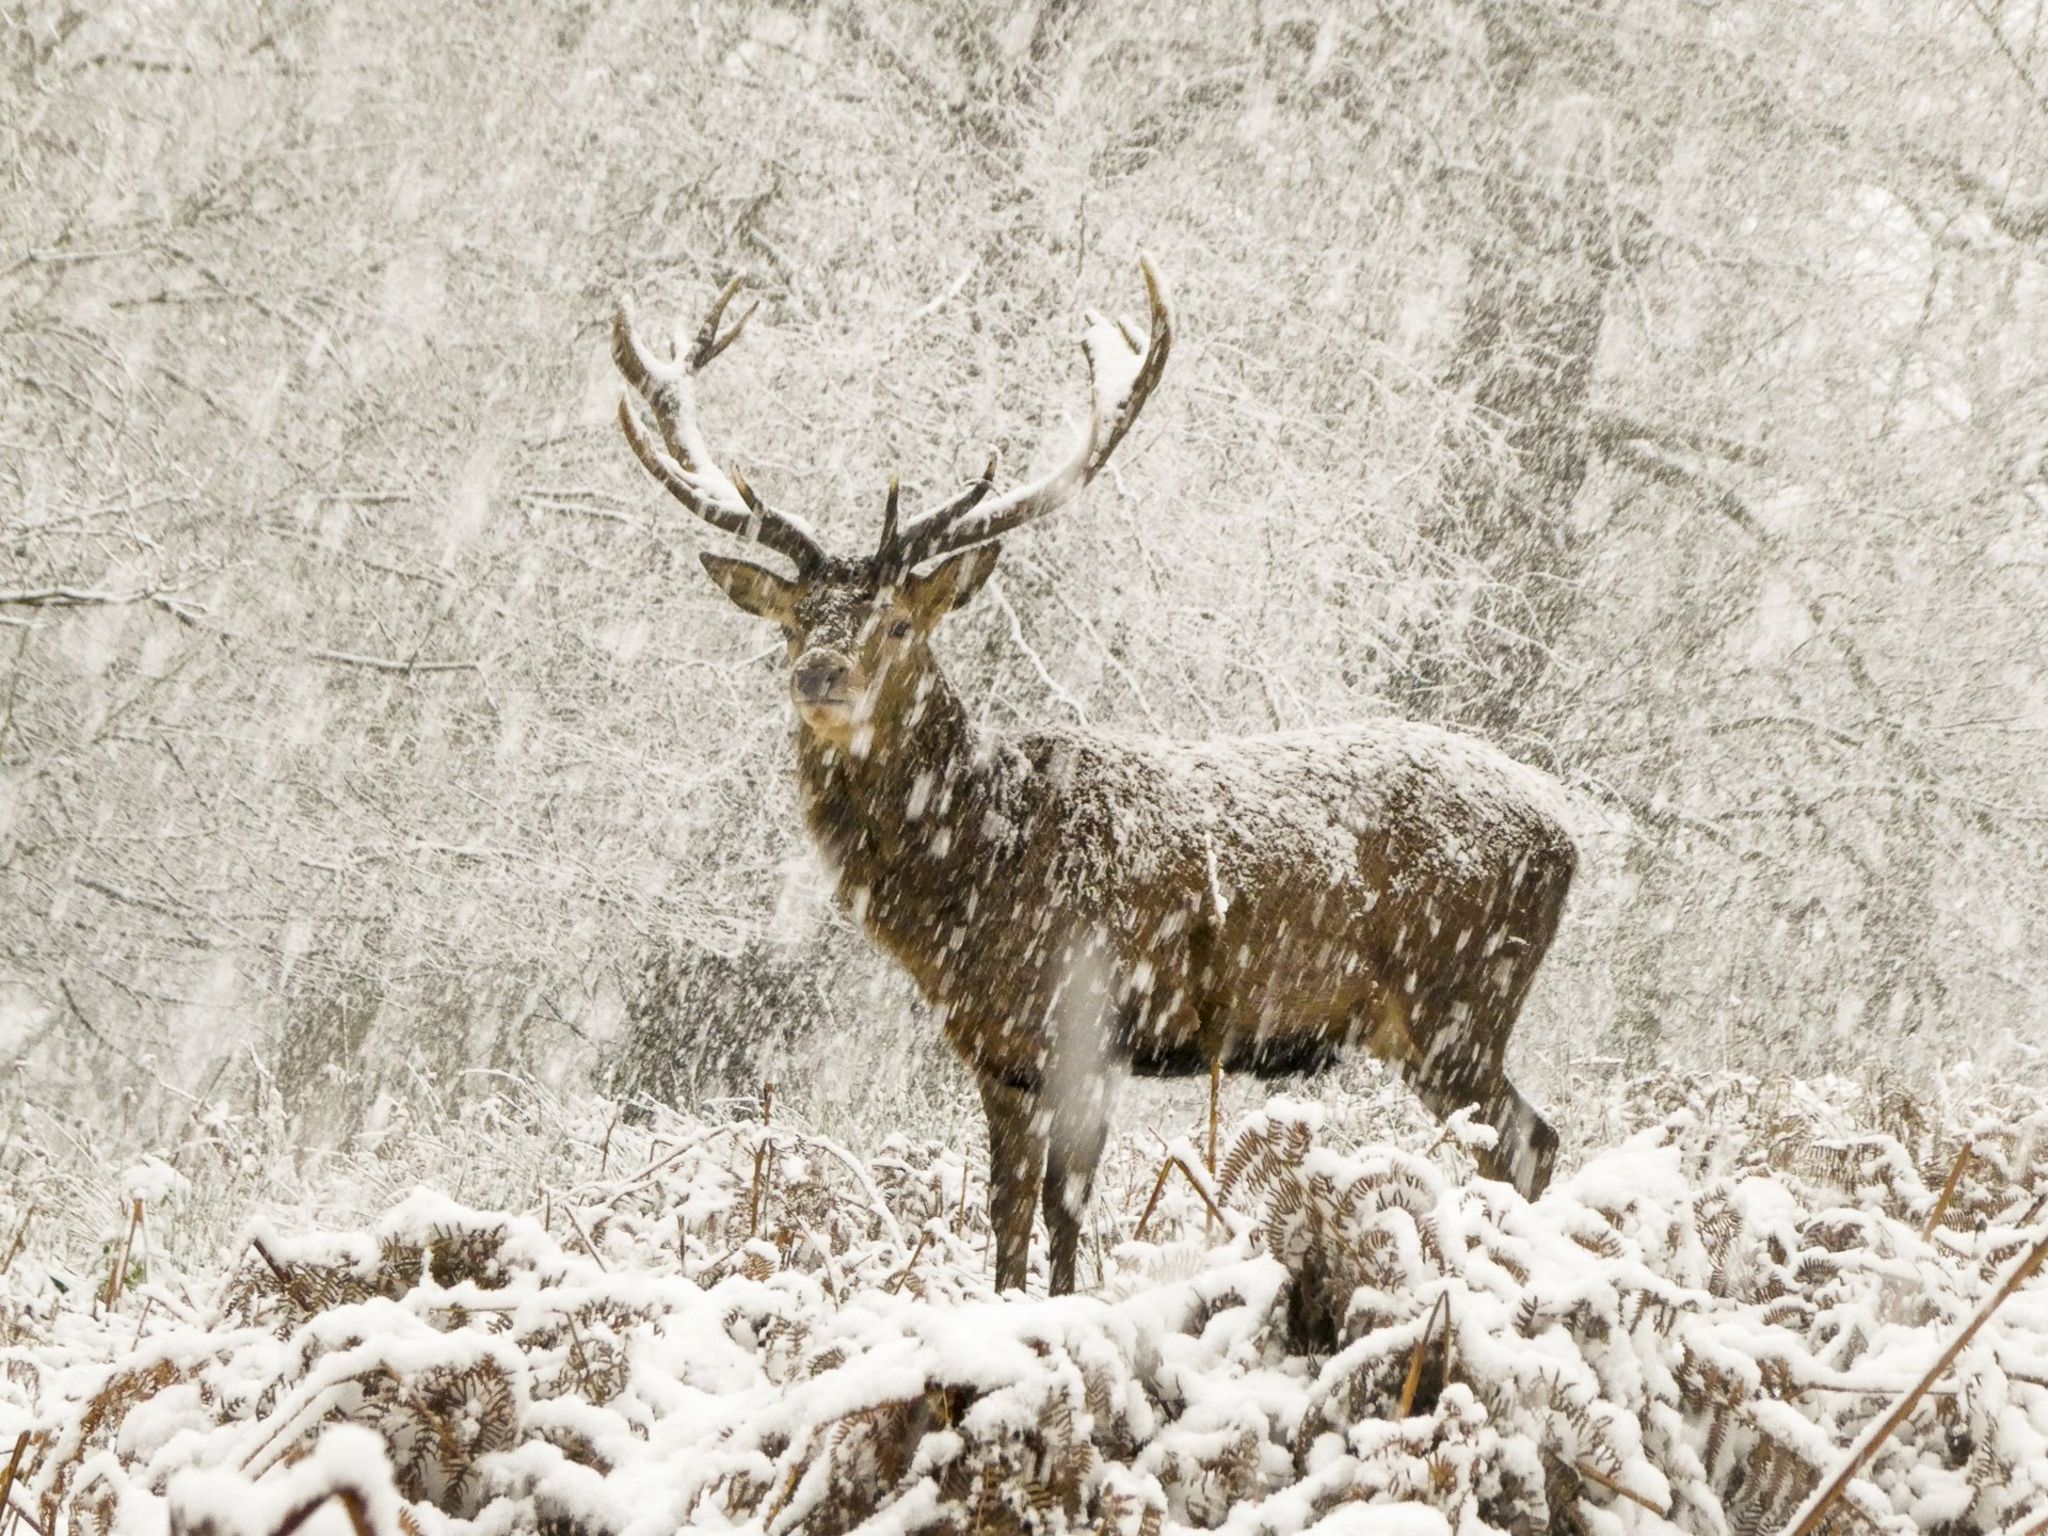 Stag stood in snow flurry